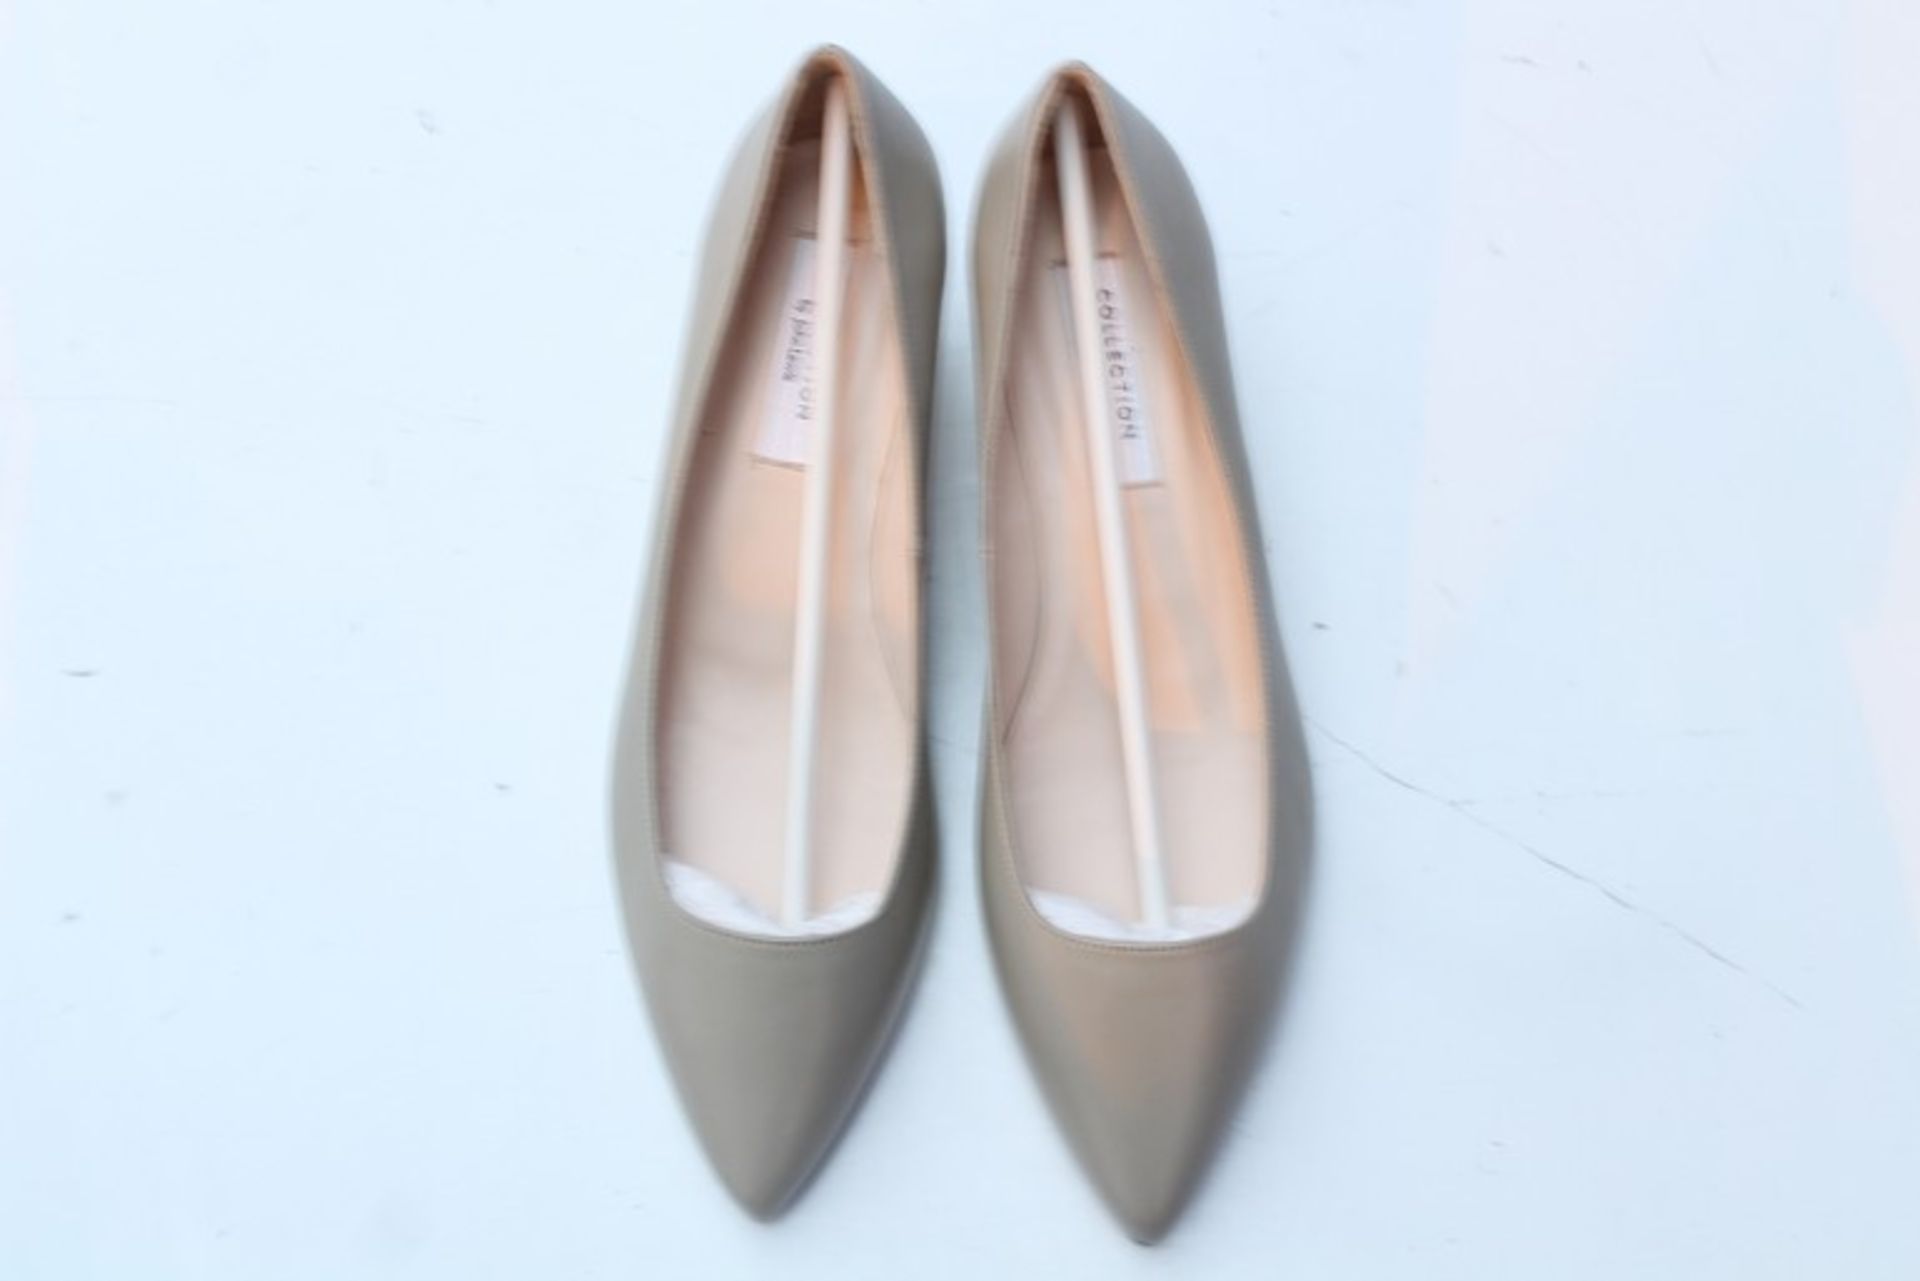 1 x BOXED PAIR OF SIZE 5 TAUPE LADIES LEATHER SHOES RRP £80  *PLEASE NOTE THAT THE BID PRICE IS